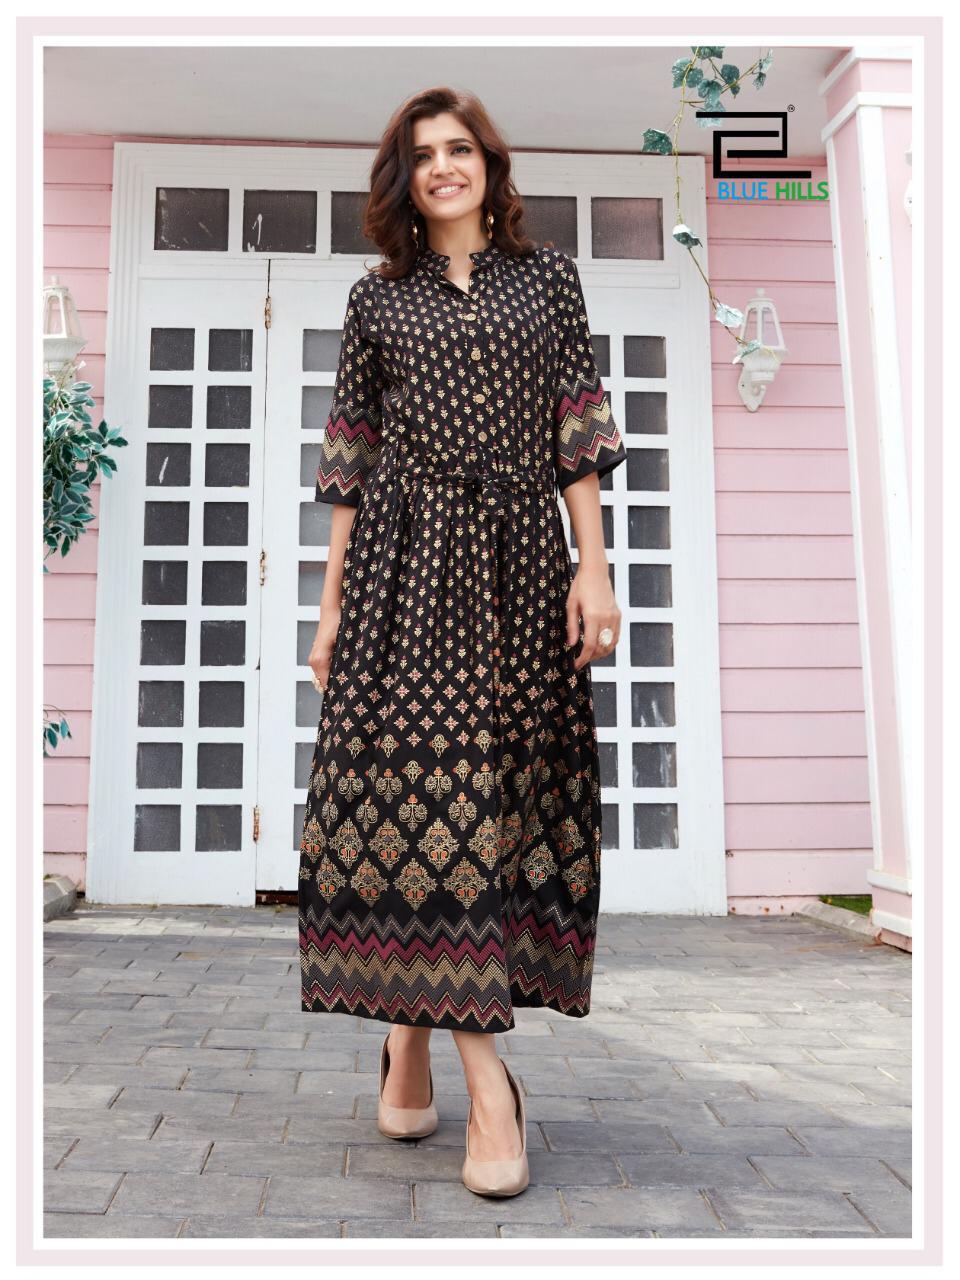 Blue Hills Presents Royal Touch Rayon Long Gown Style Exclusive Kurti Wholesaler